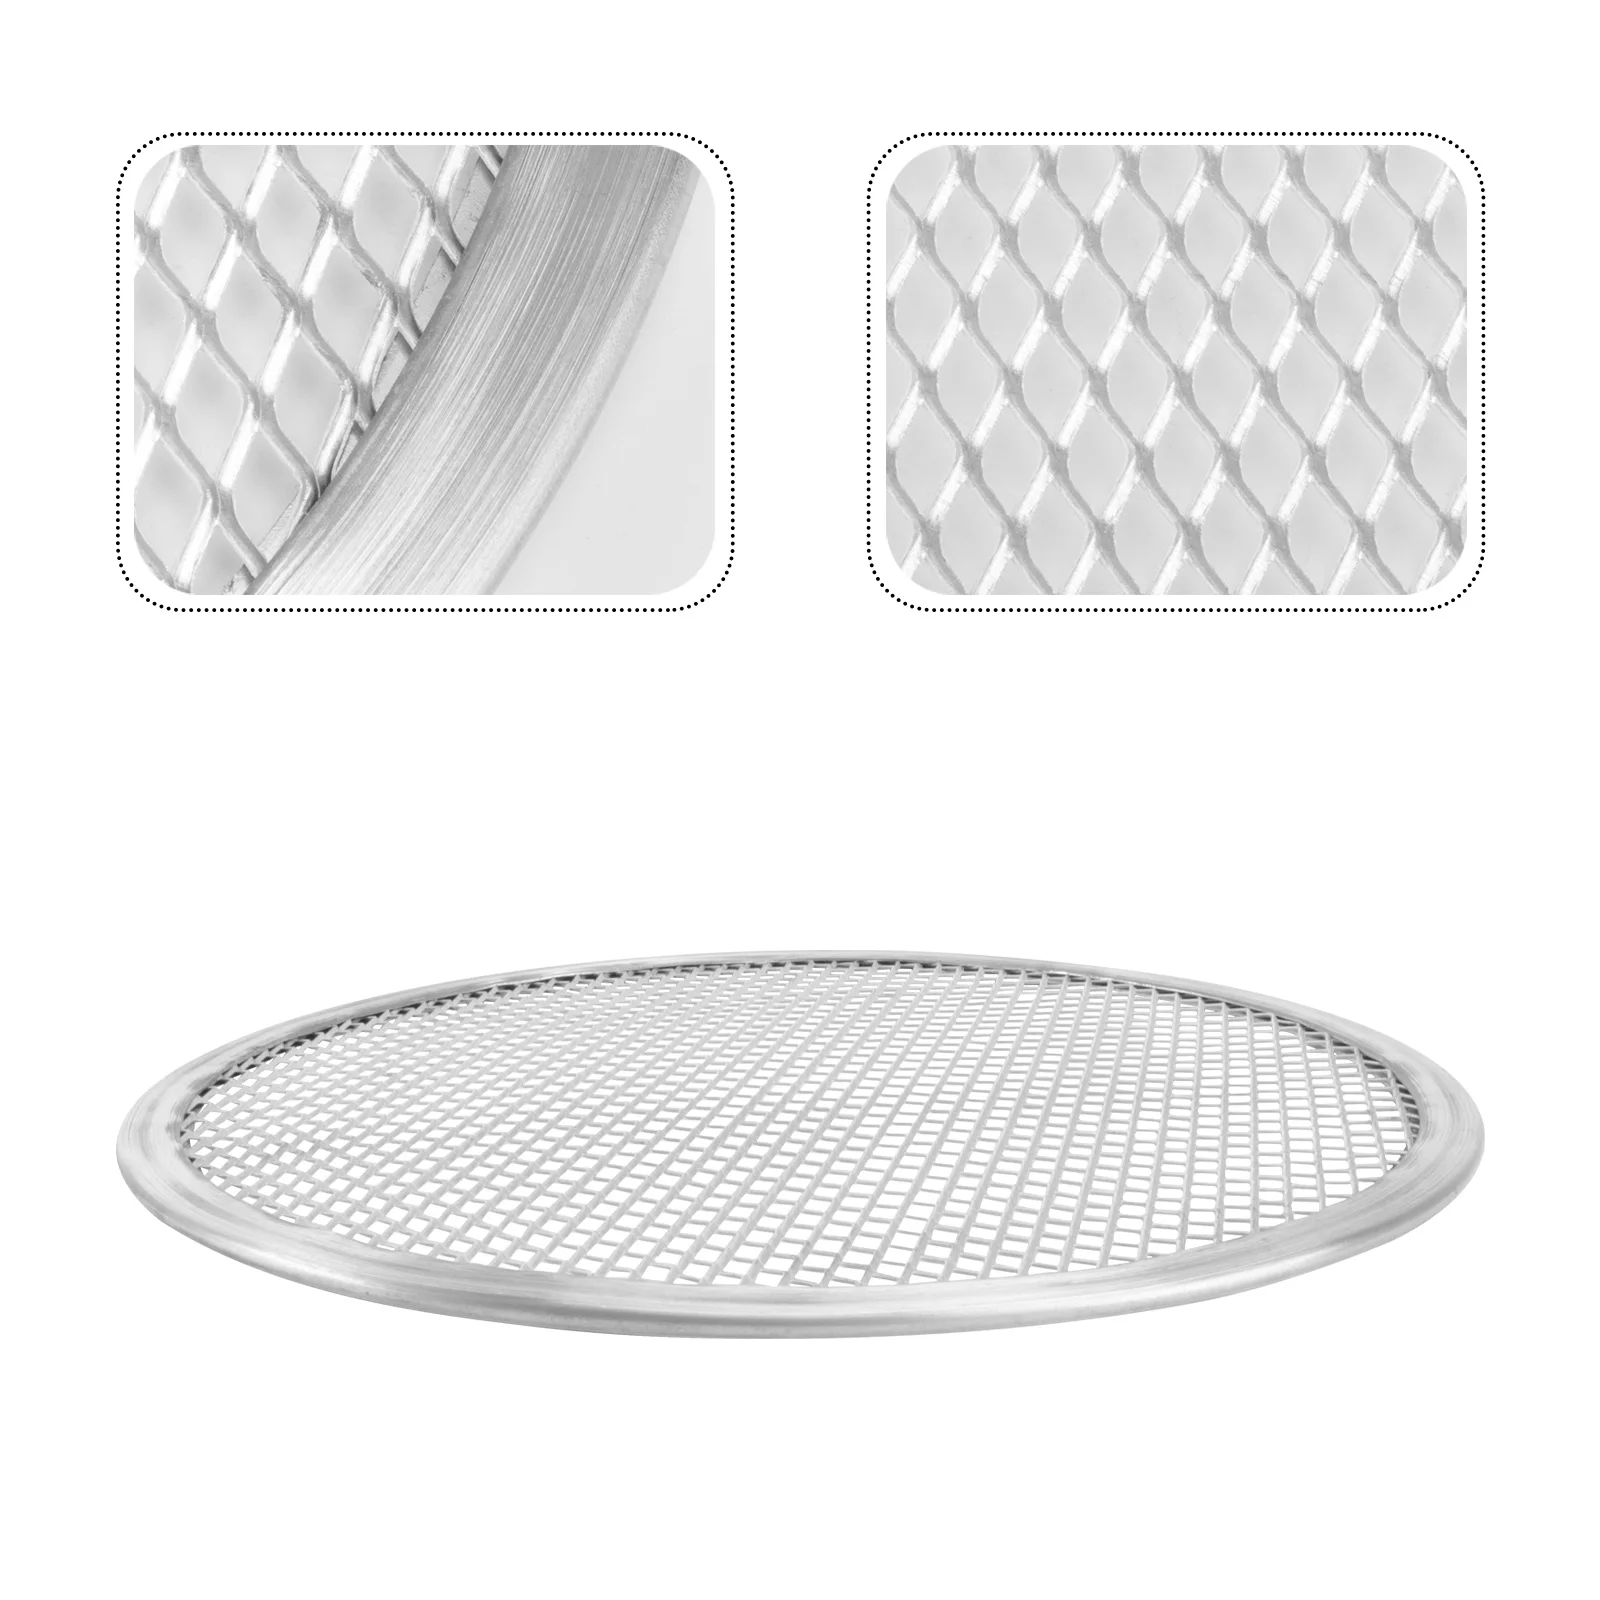 

Pizza Stone Mesh Baking Pan 16 Inches Aluminum Seamless Tray Home Kitchen Pans Restaurant Toaster Oven